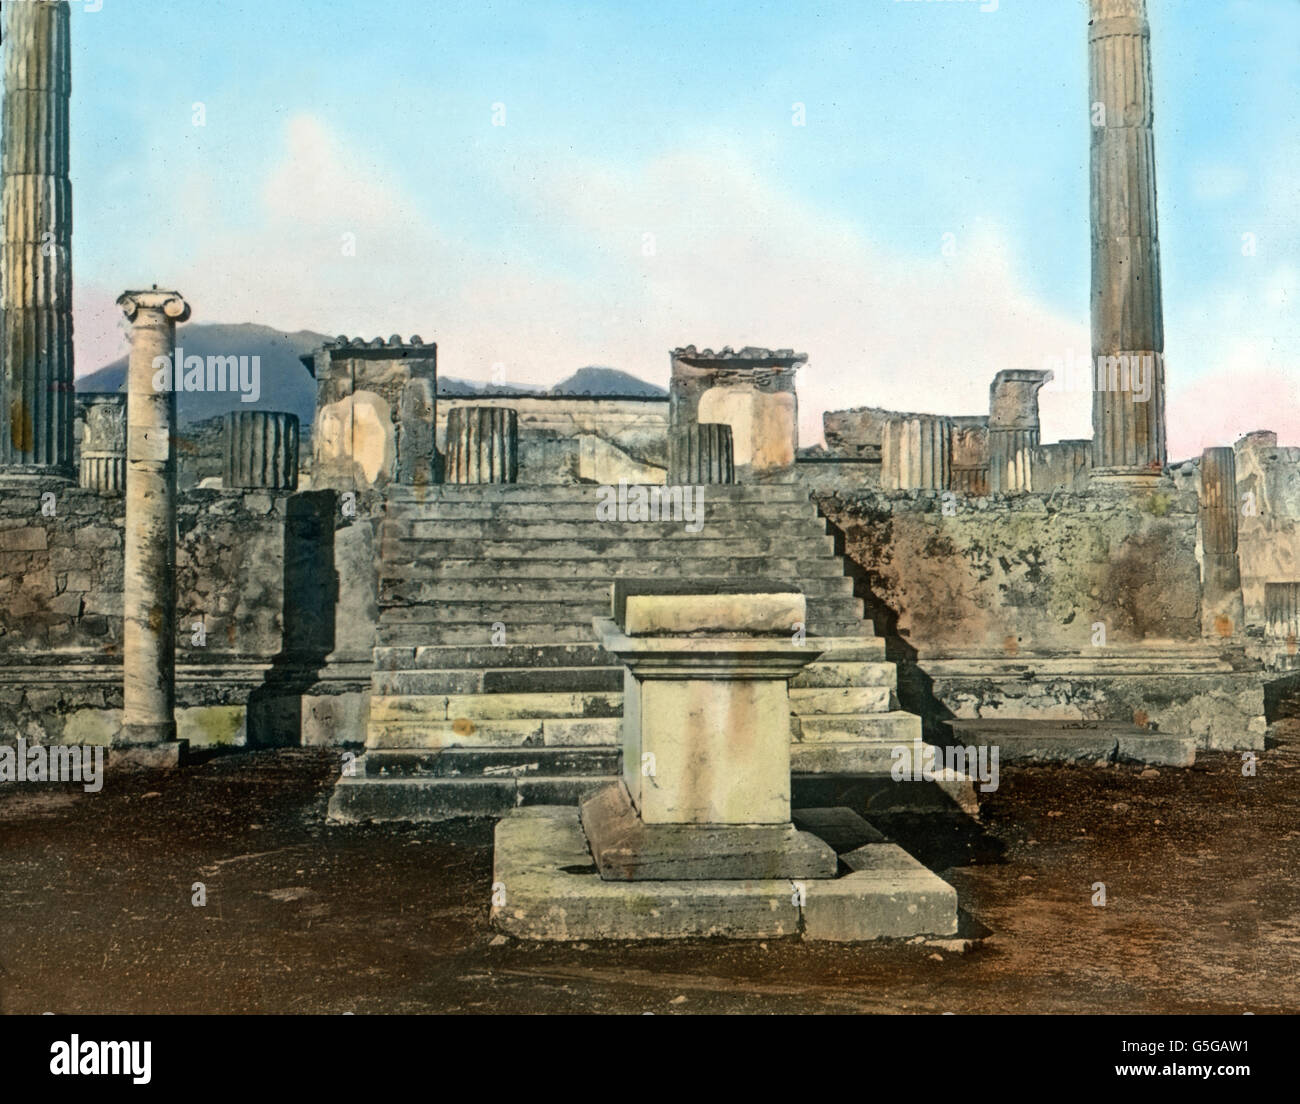 Pompeji, Tempel des Apollo. Temple of Apollo in the former city of Pompeii. temple, archaeology, archaeological site, altar, columns, stone, sanctuary, religion, volcanicity, volcanism, geology, history, historical, 1910s, 1920s, 20th century, archive, Carl Simon, hand-coloured glass slide Stock Photo